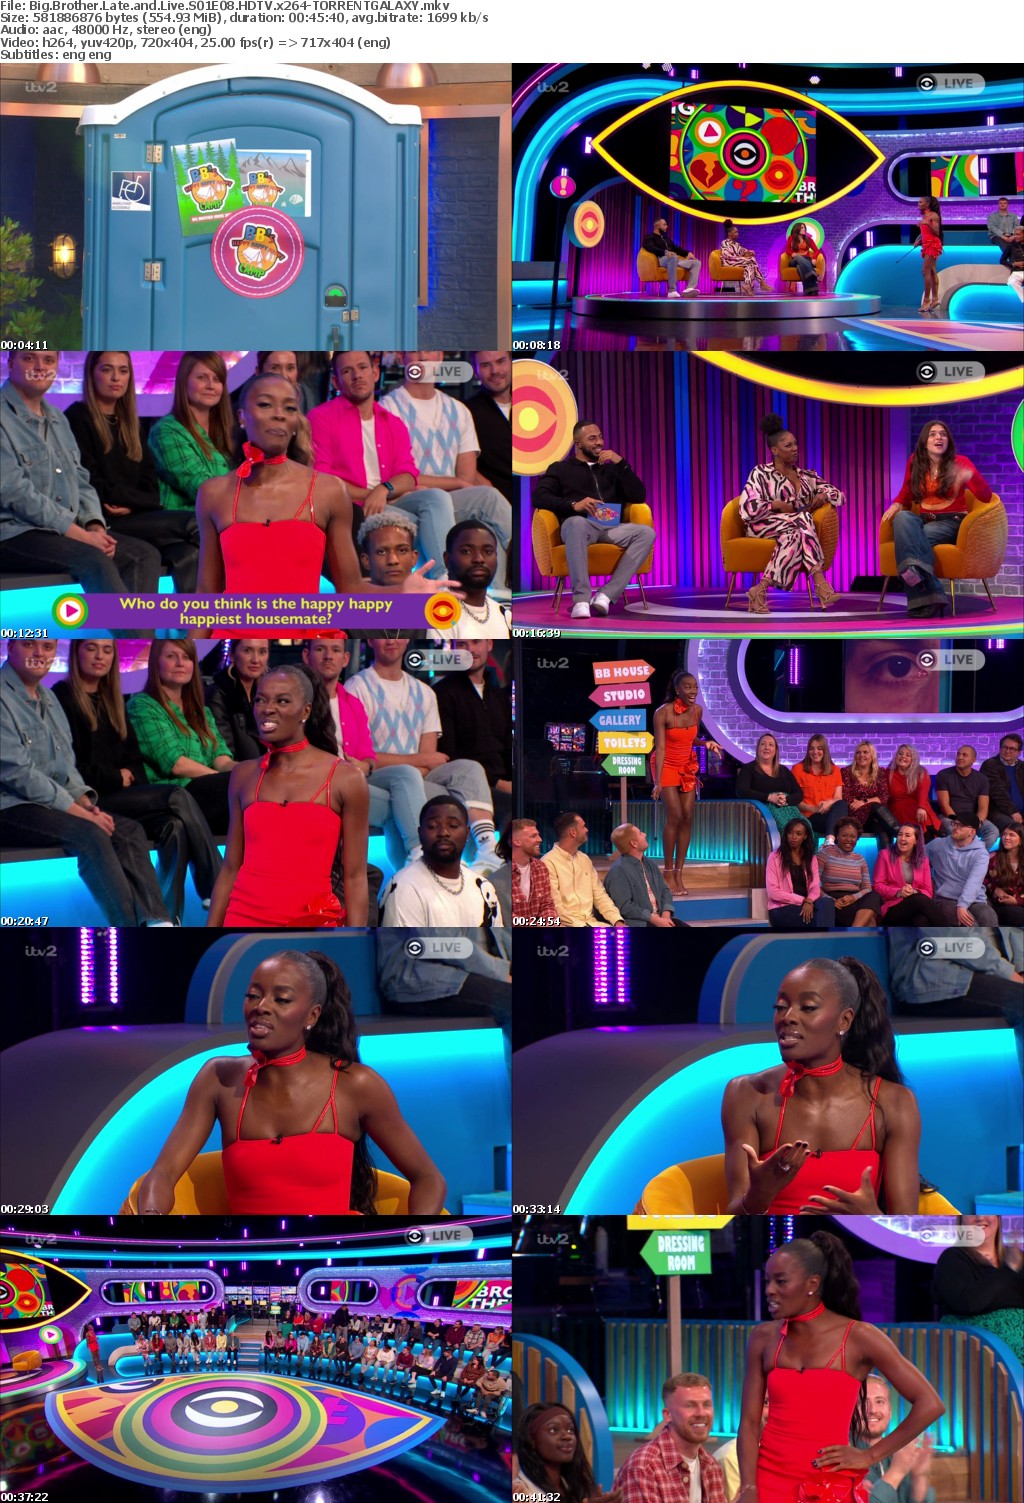 Big Brother Late and Live S01E08 HDTV x264-GALAXY